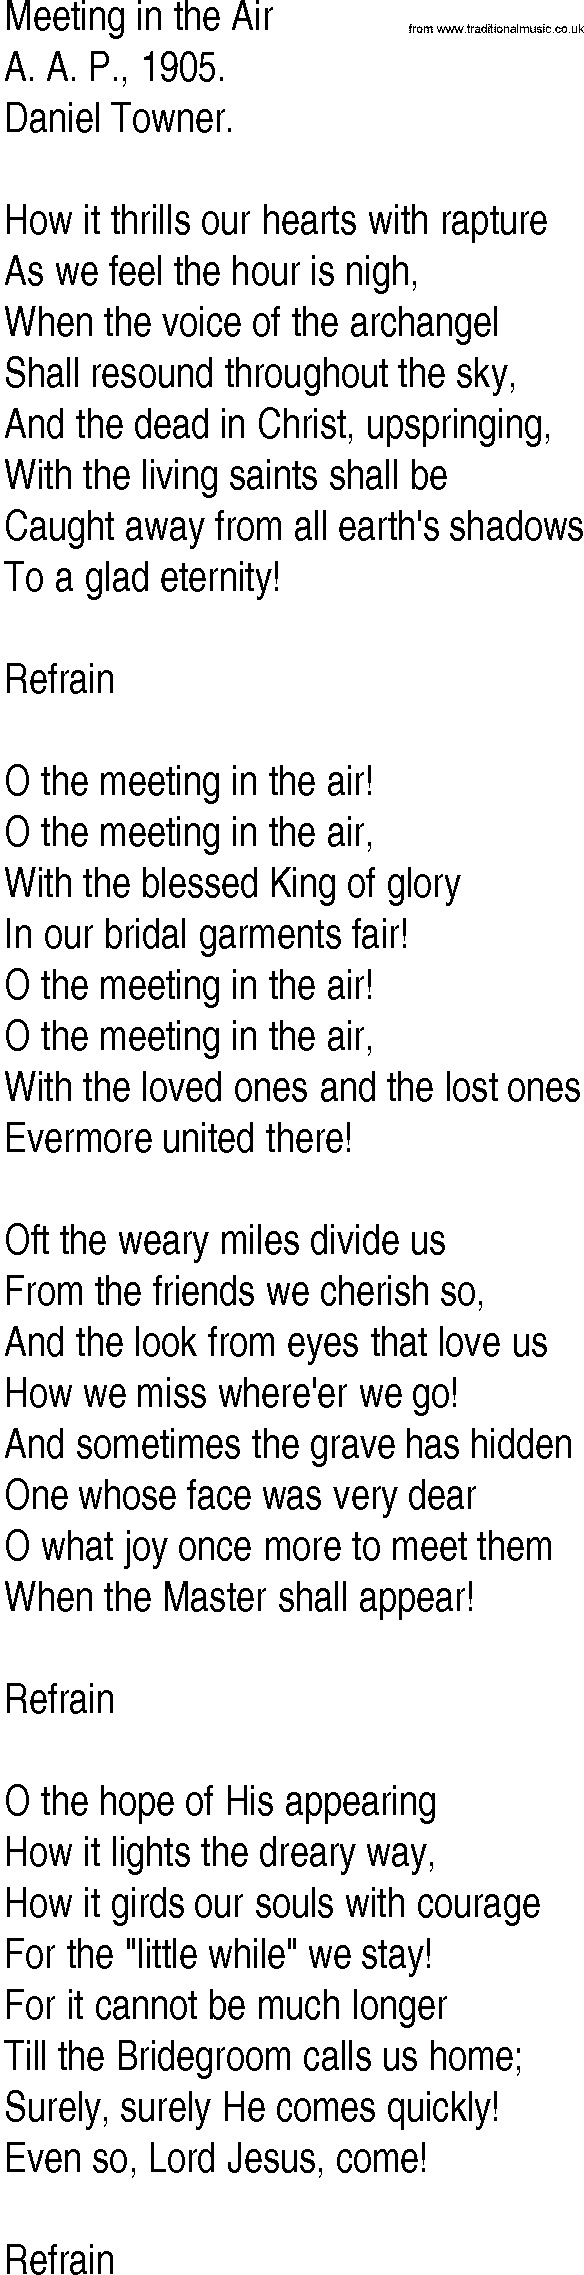 Hymn and Gospel Song: Meeting in the Air by A A P lyrics